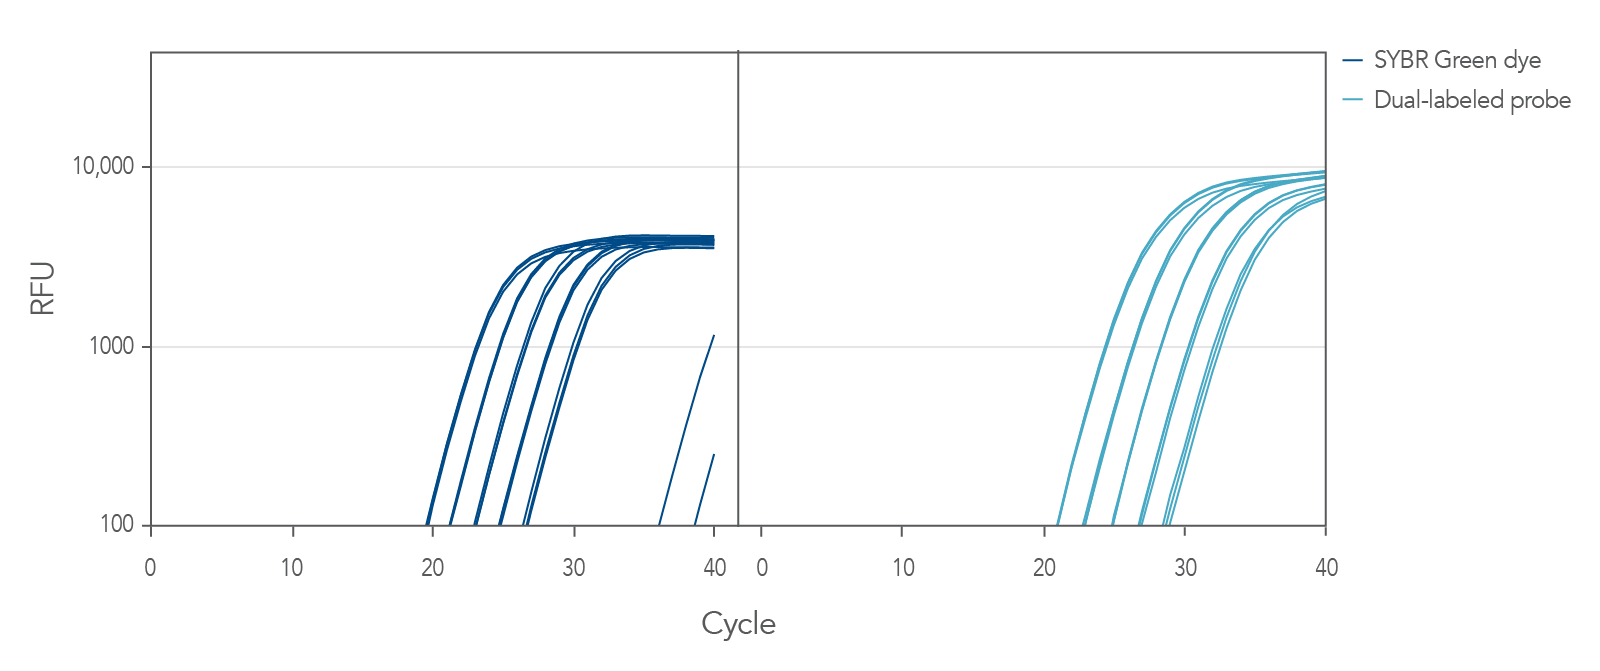 2 Graphs showing amplification plots of SYBR Green dye on the left and dual-labeled cDNA on the right. Delta Rn is seen on the y axis with the number of cycles on the x axis.